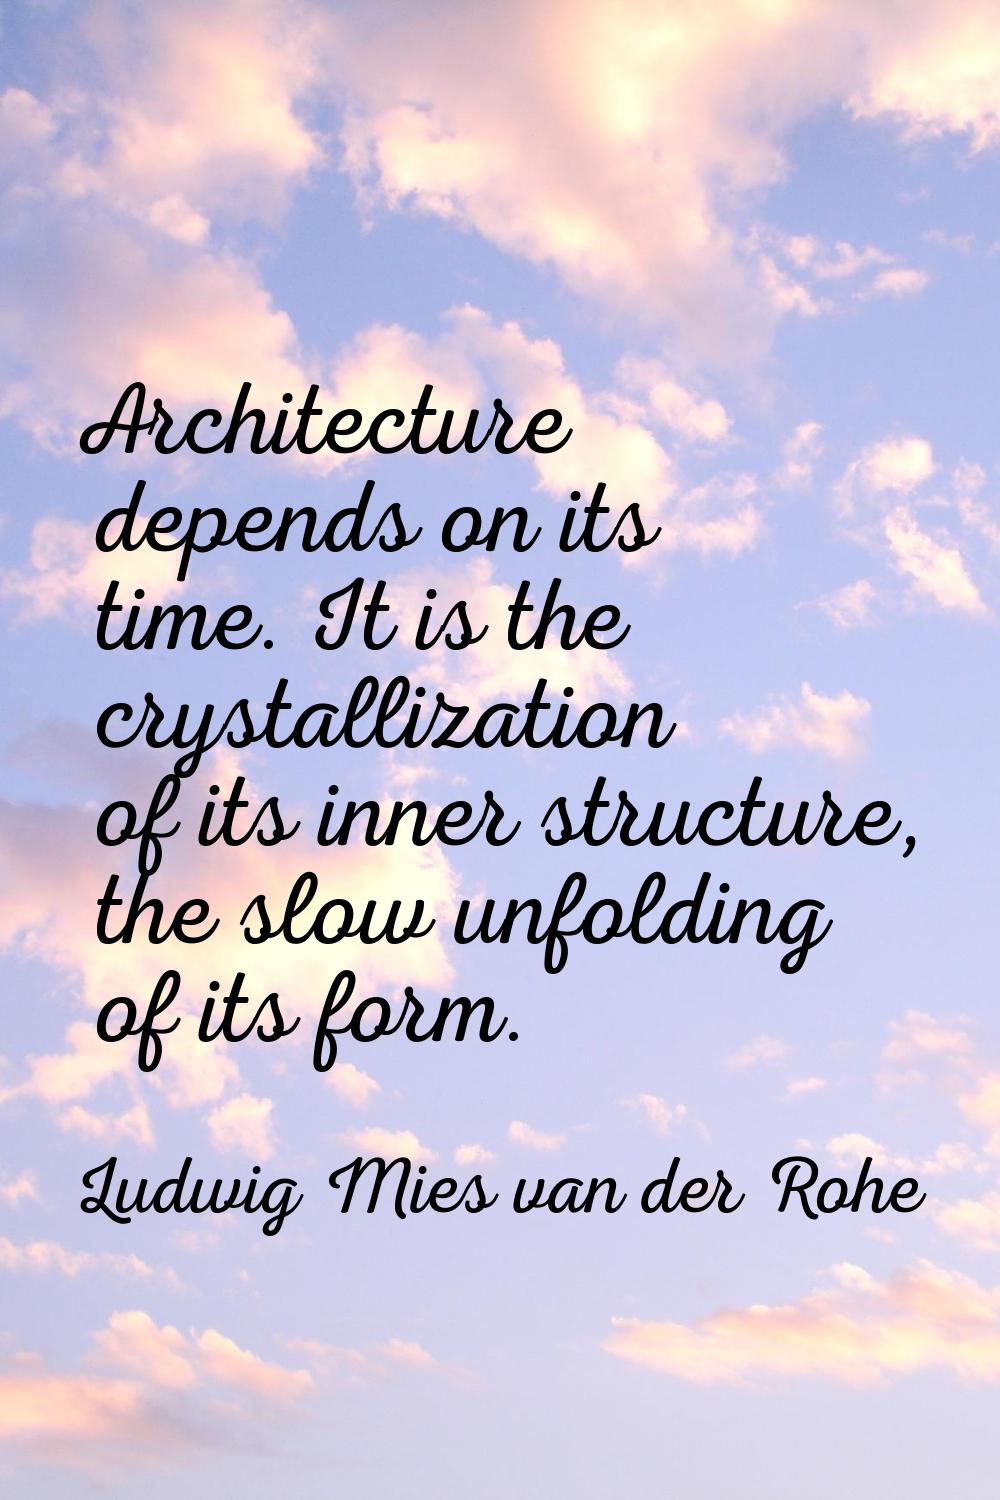 Architecture depends on its time. It is the crystallization of its inner structure, the slow unfold